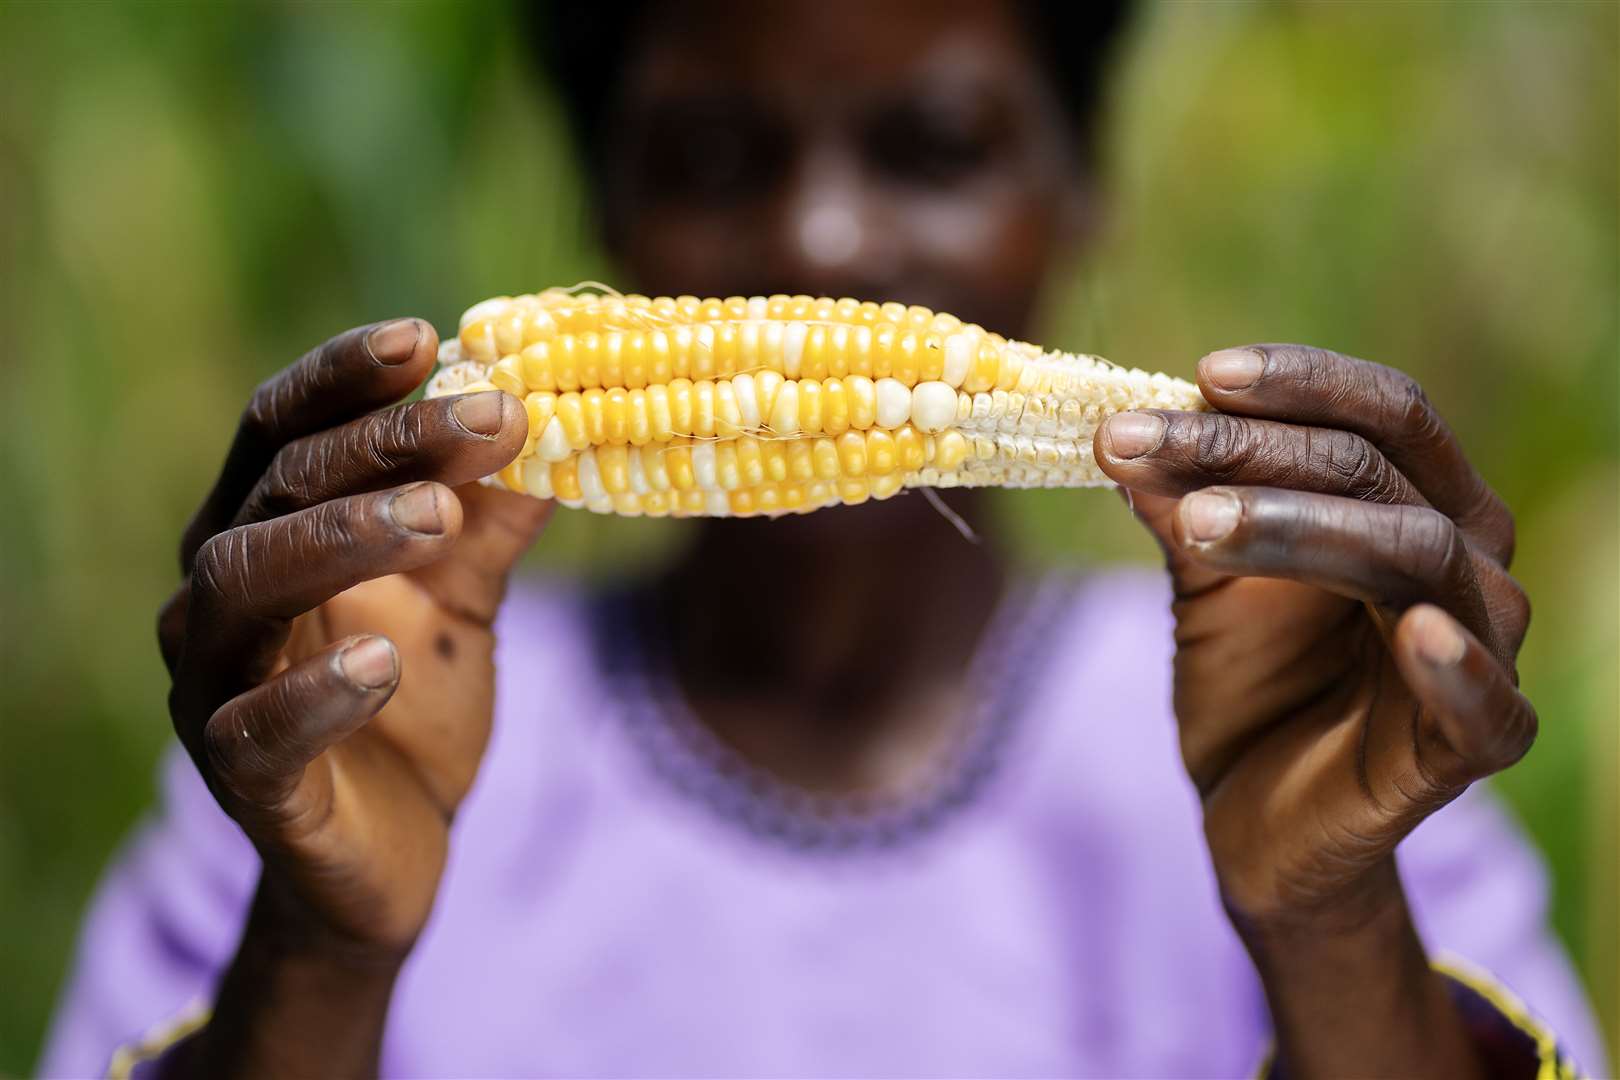 Malita Mussa holds a malformed maize cob outside her home in the village of Manduwasa (Brian Lawless/PA)